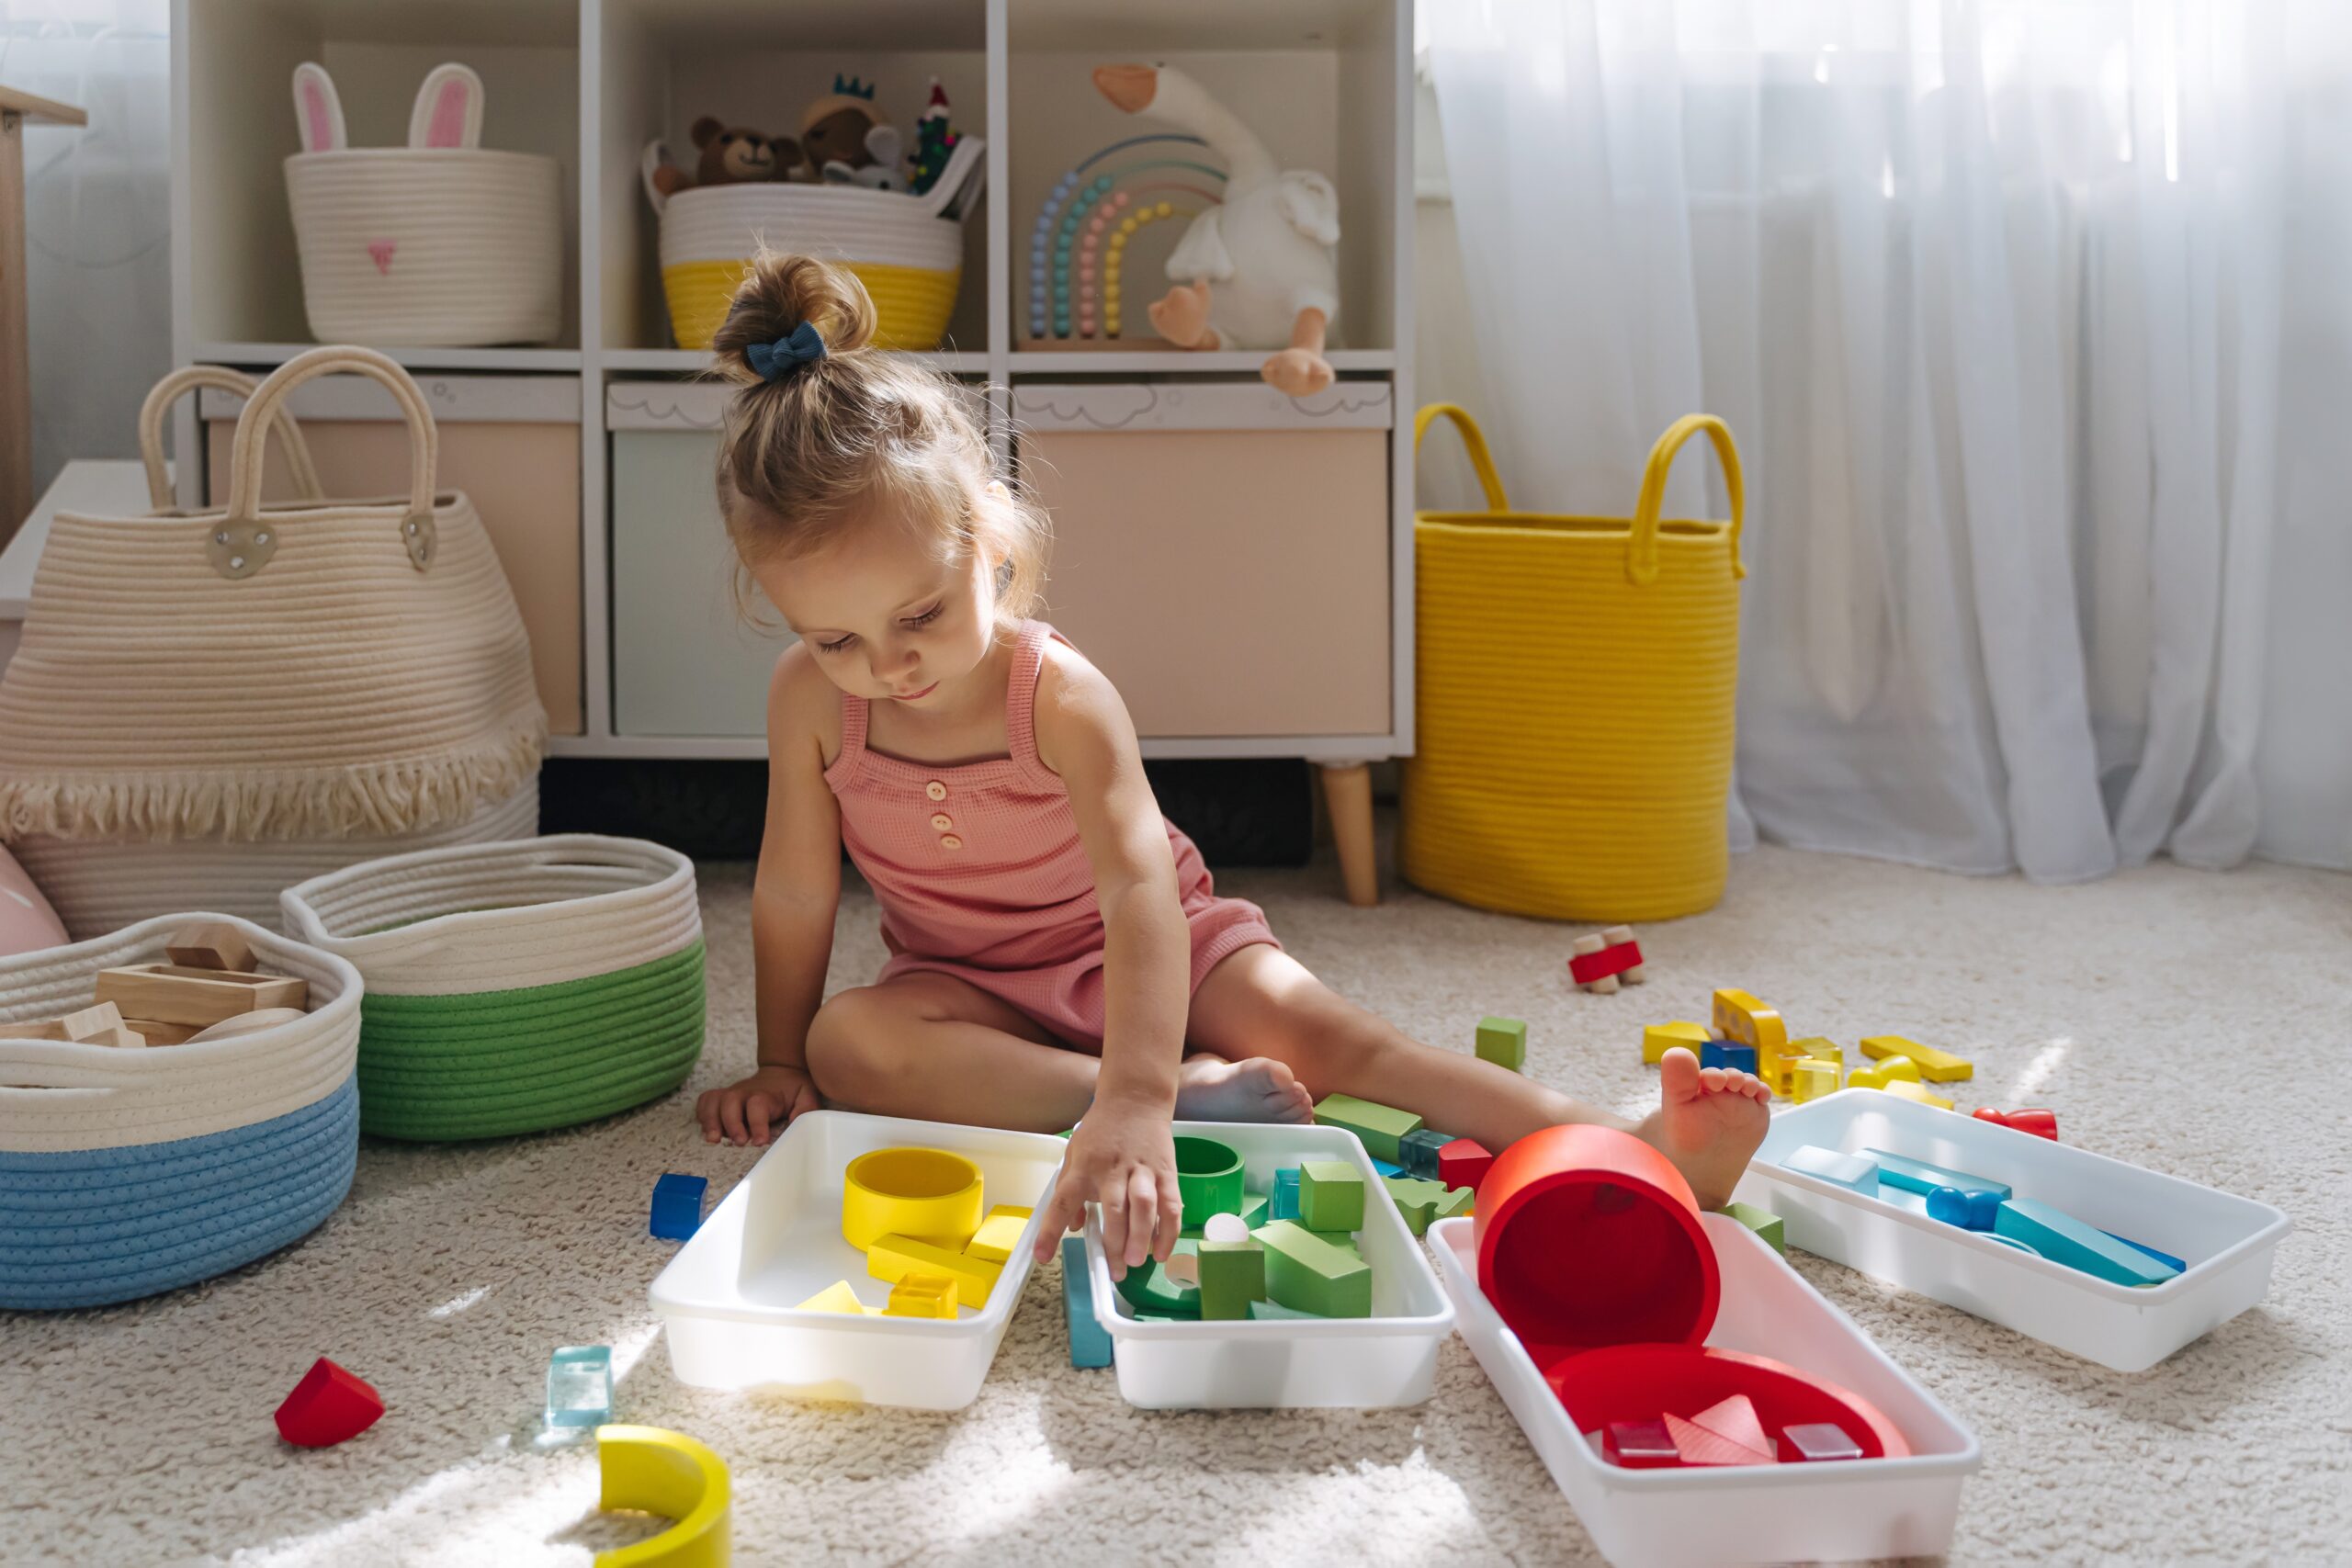 https://www.mother.ly/wp-content/uploads/2021/09/A-little-girl-playing-with-colorful-wooden-blocks-on-floor-in-nursery-scaled.jpg